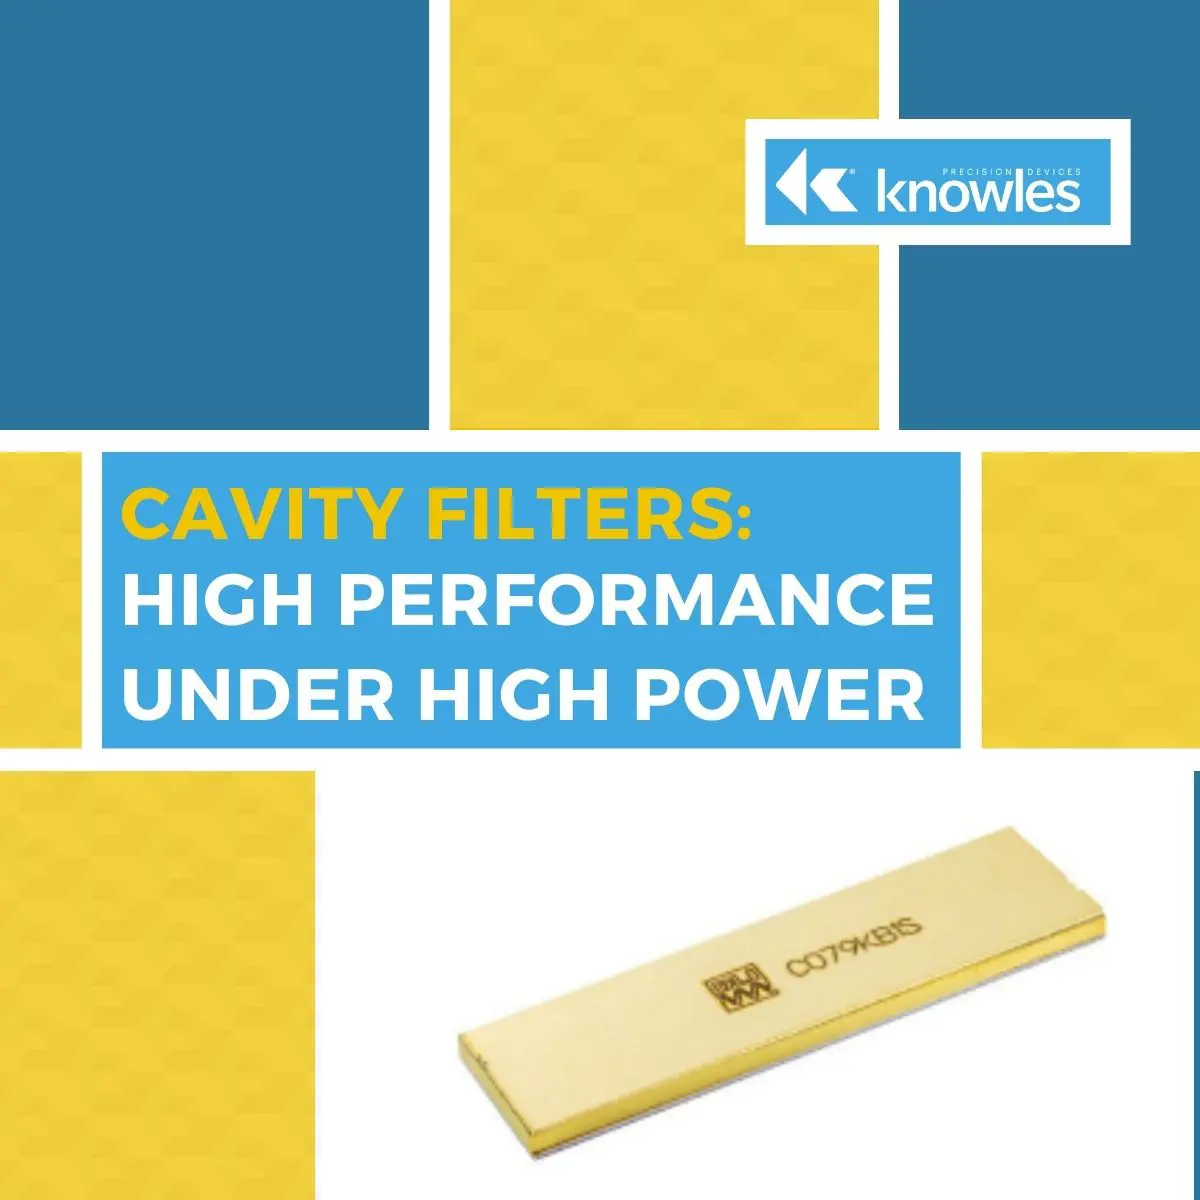 Cavity Filters: High Performance Under High Power